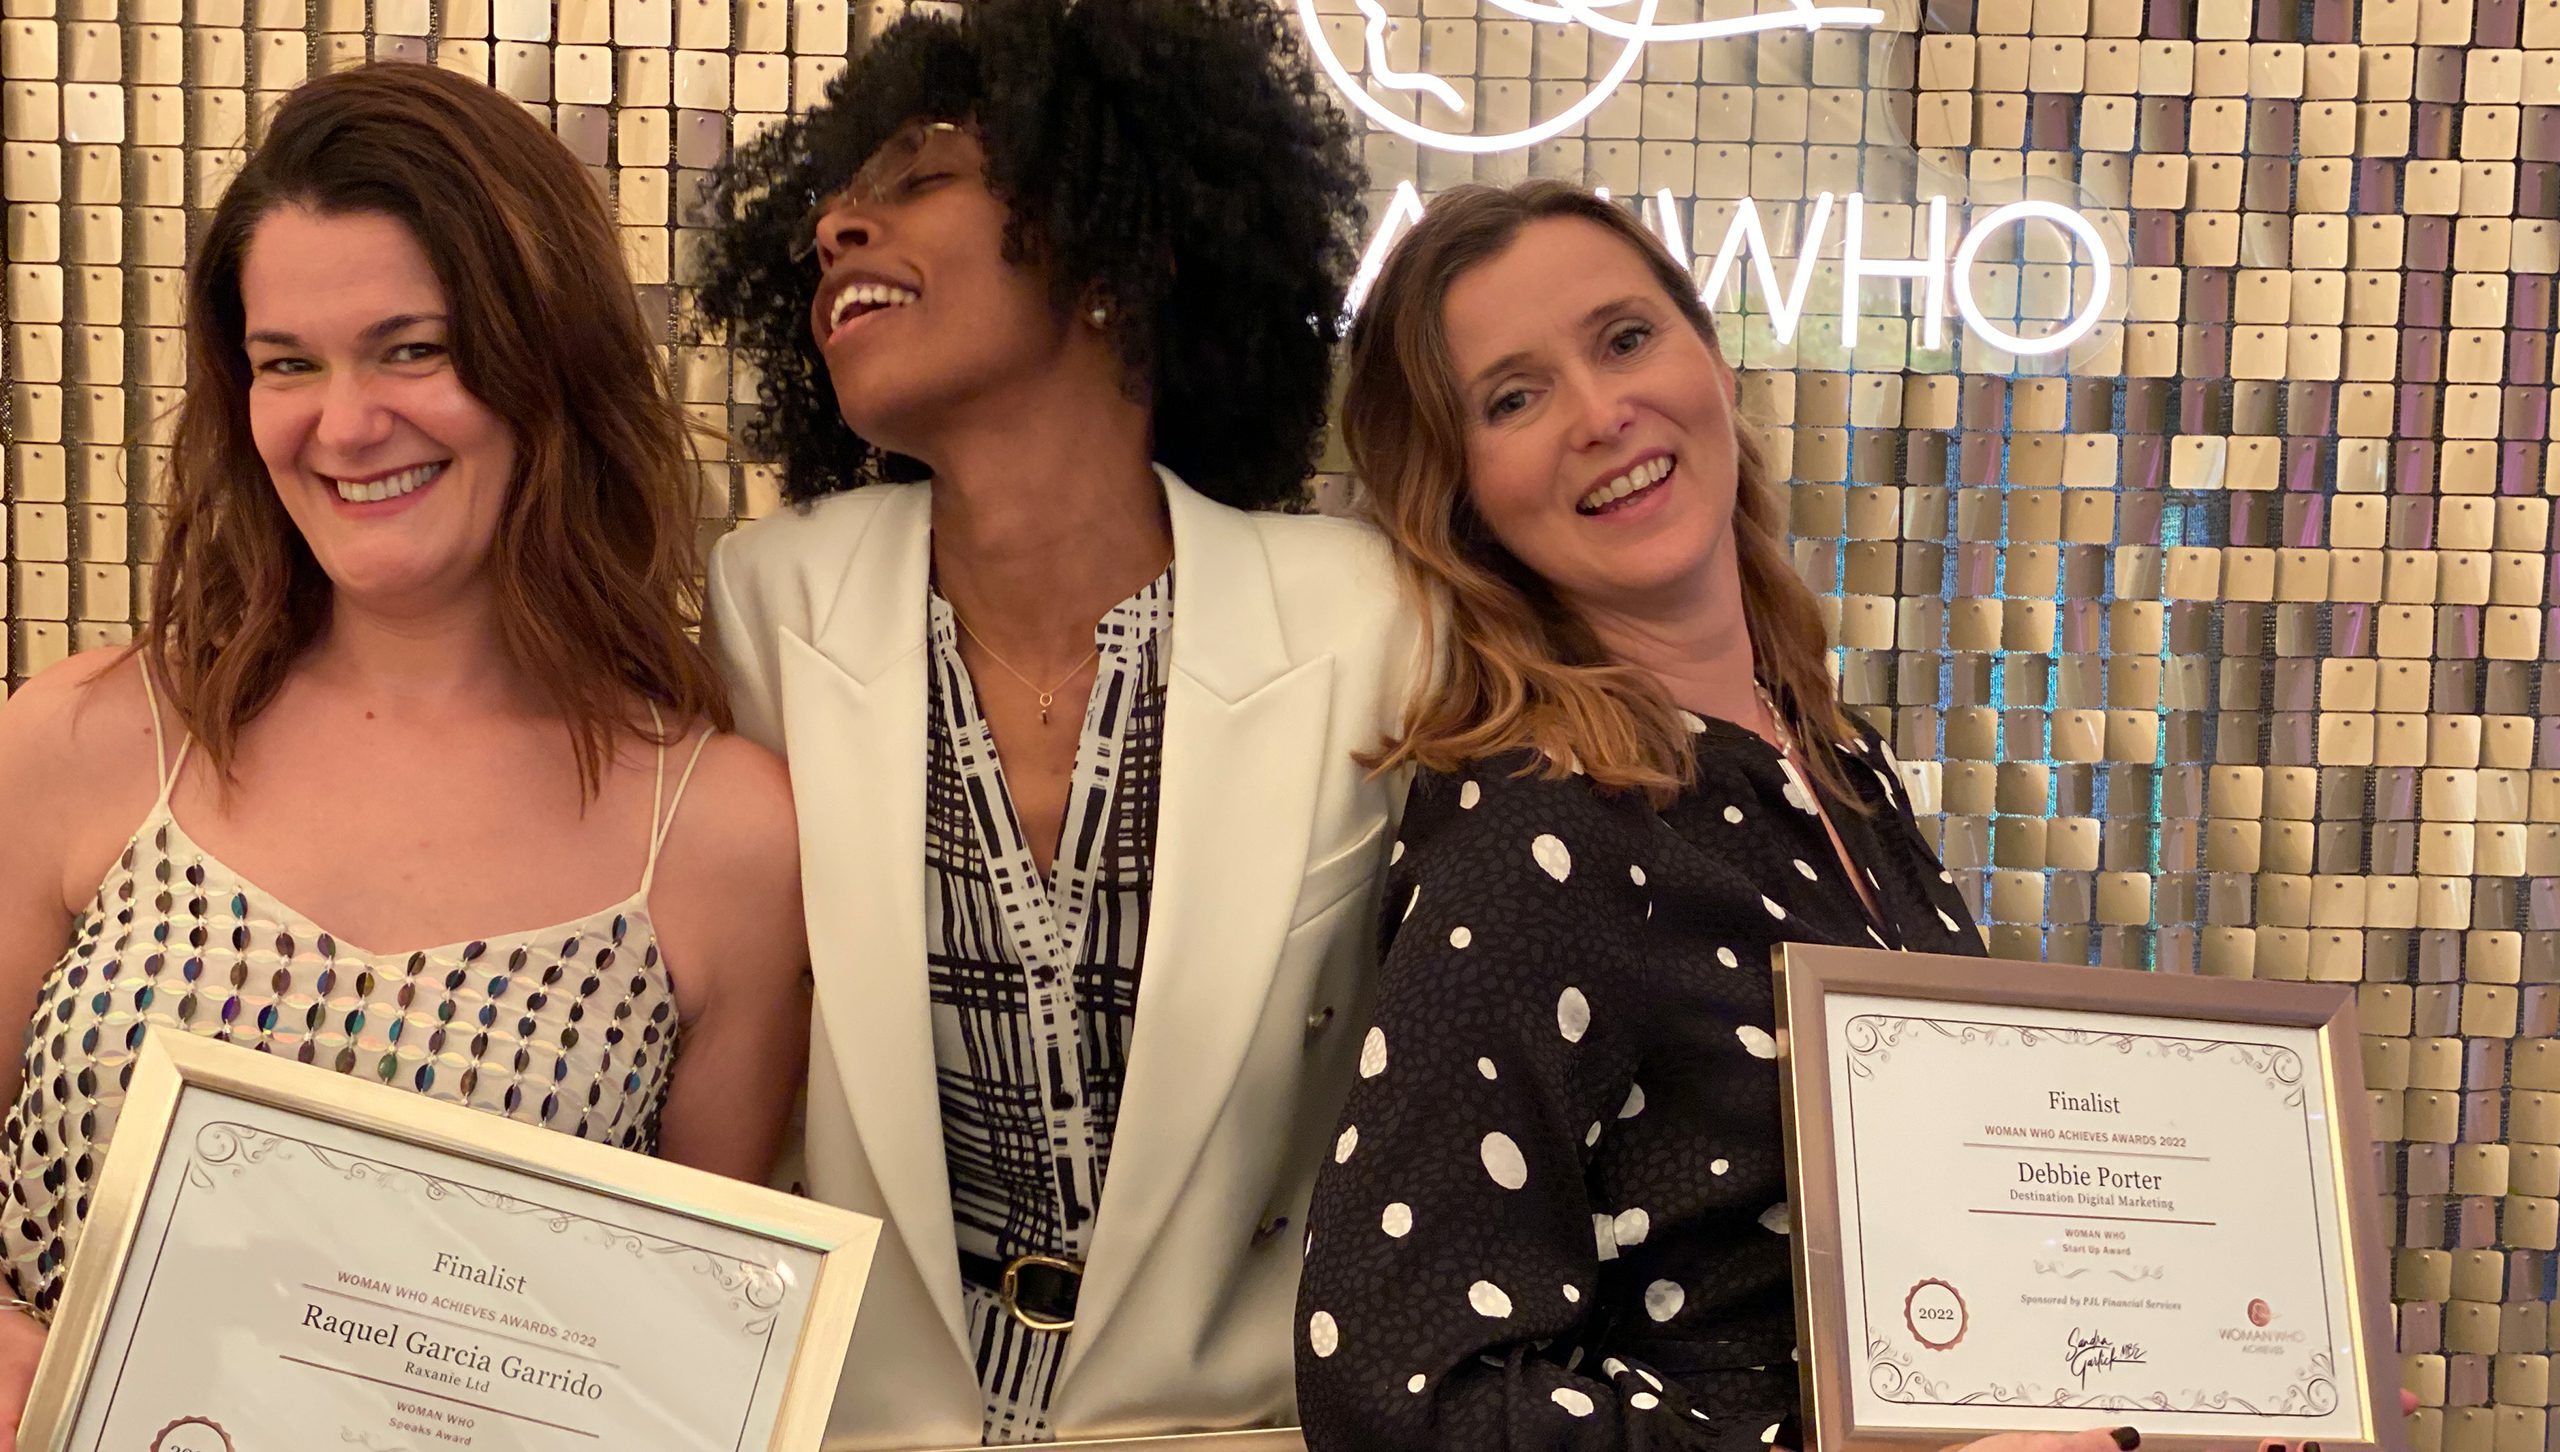 2022 in review - Destination Digital finalists in the Woman Who Awards